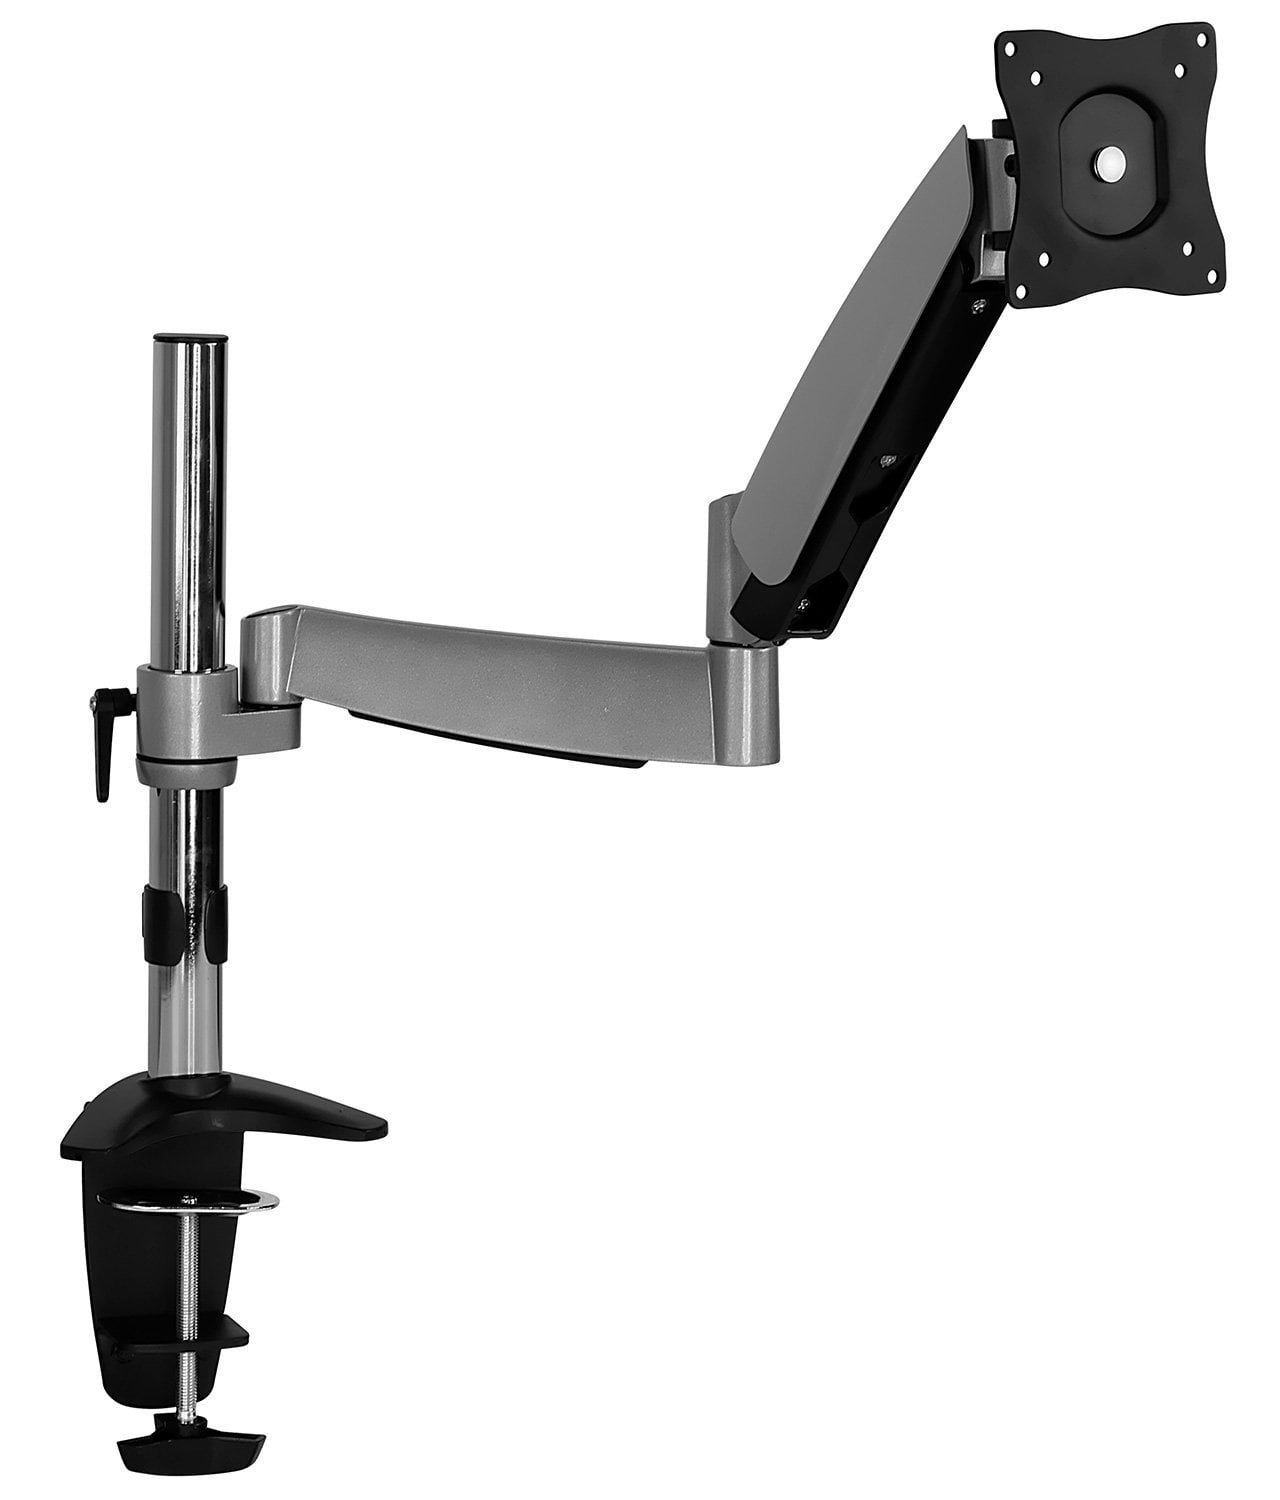 Dual Computer Monitor Desk Mount Stand Vertical Arrary for 2 Screens up to 30" 